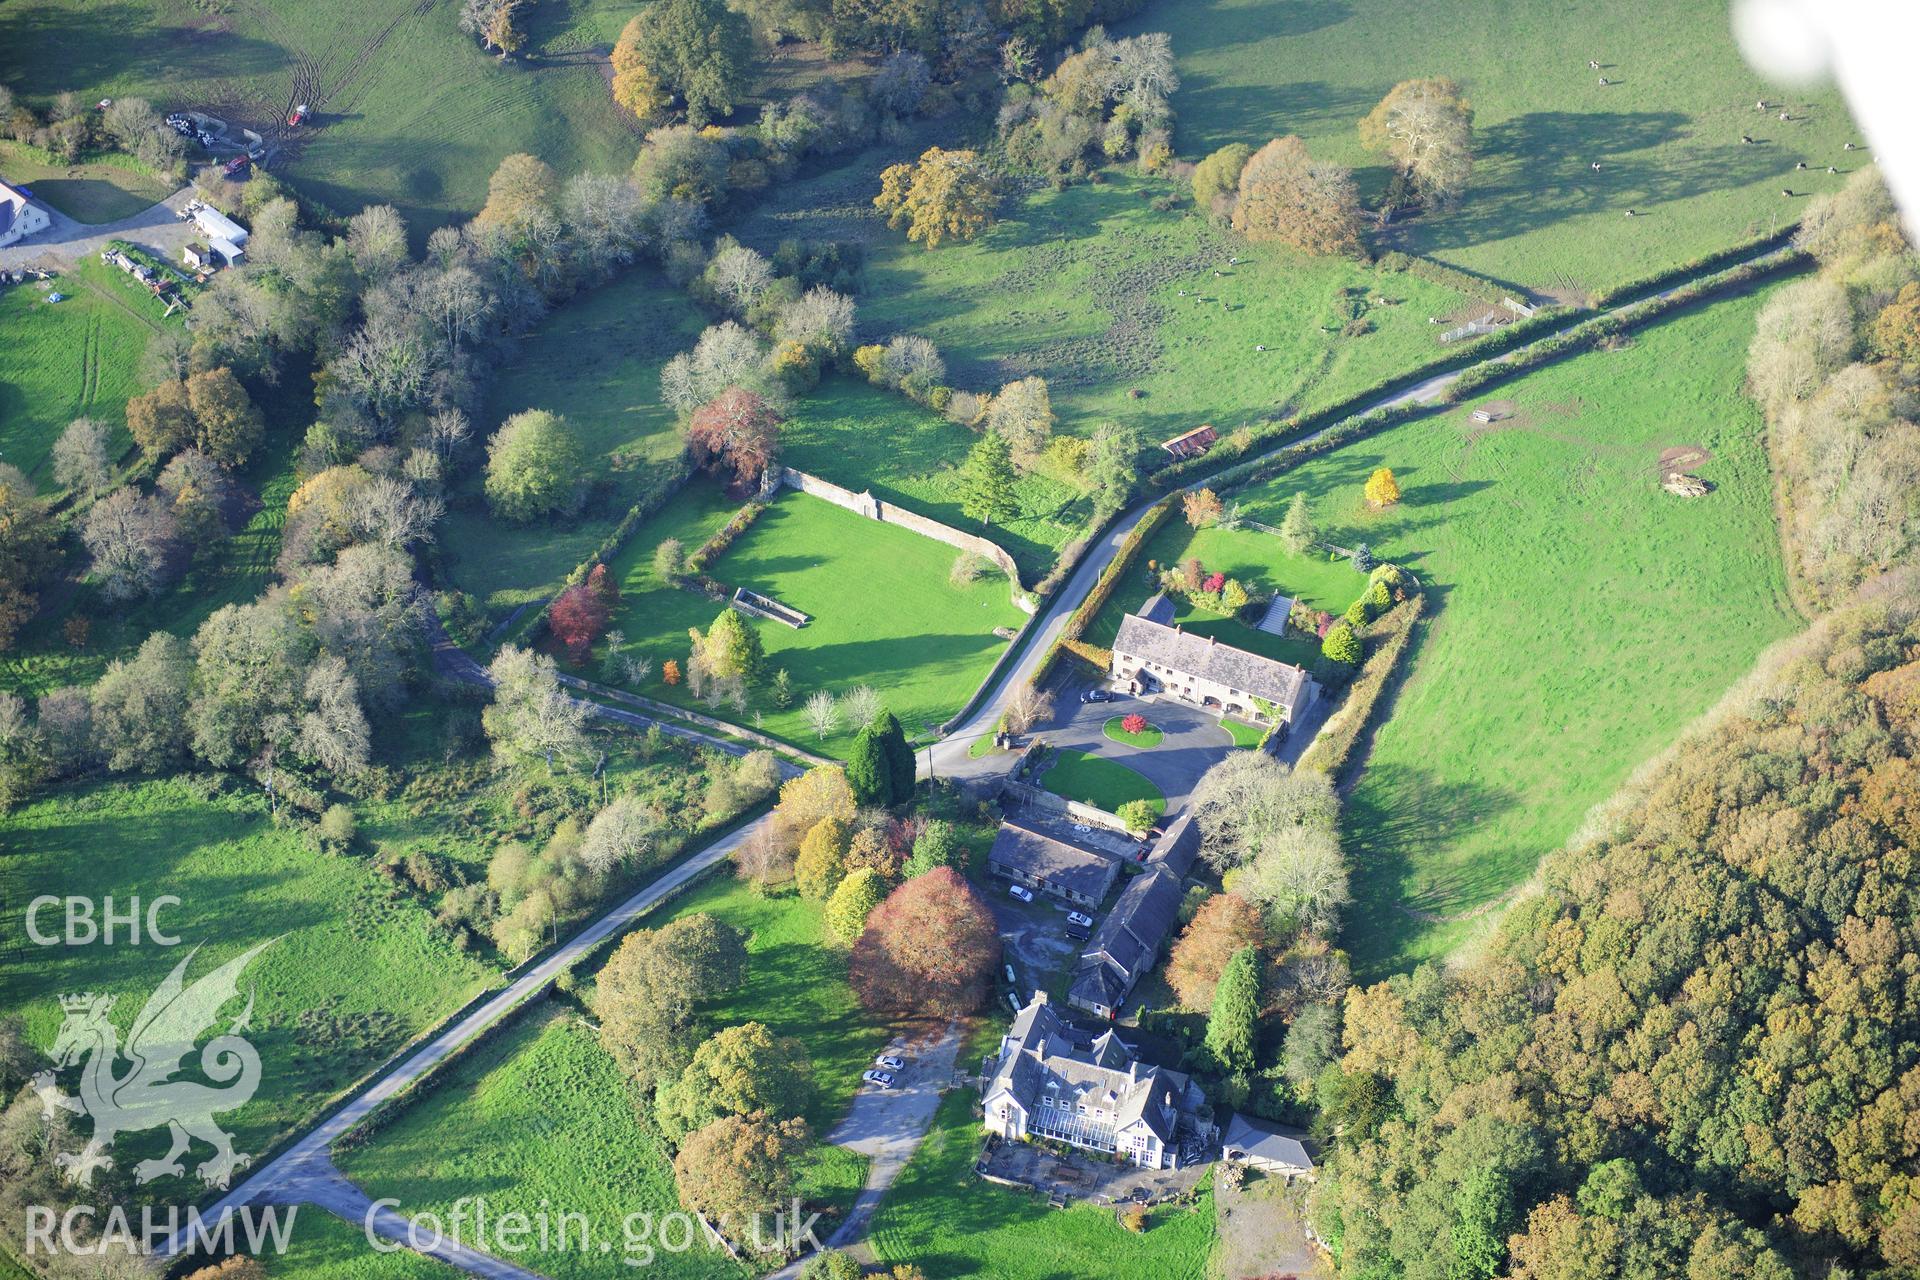 RCAHMW colour oblique photograph of Whitland Abbey. Taken by Toby Driver on 26/10/2012.